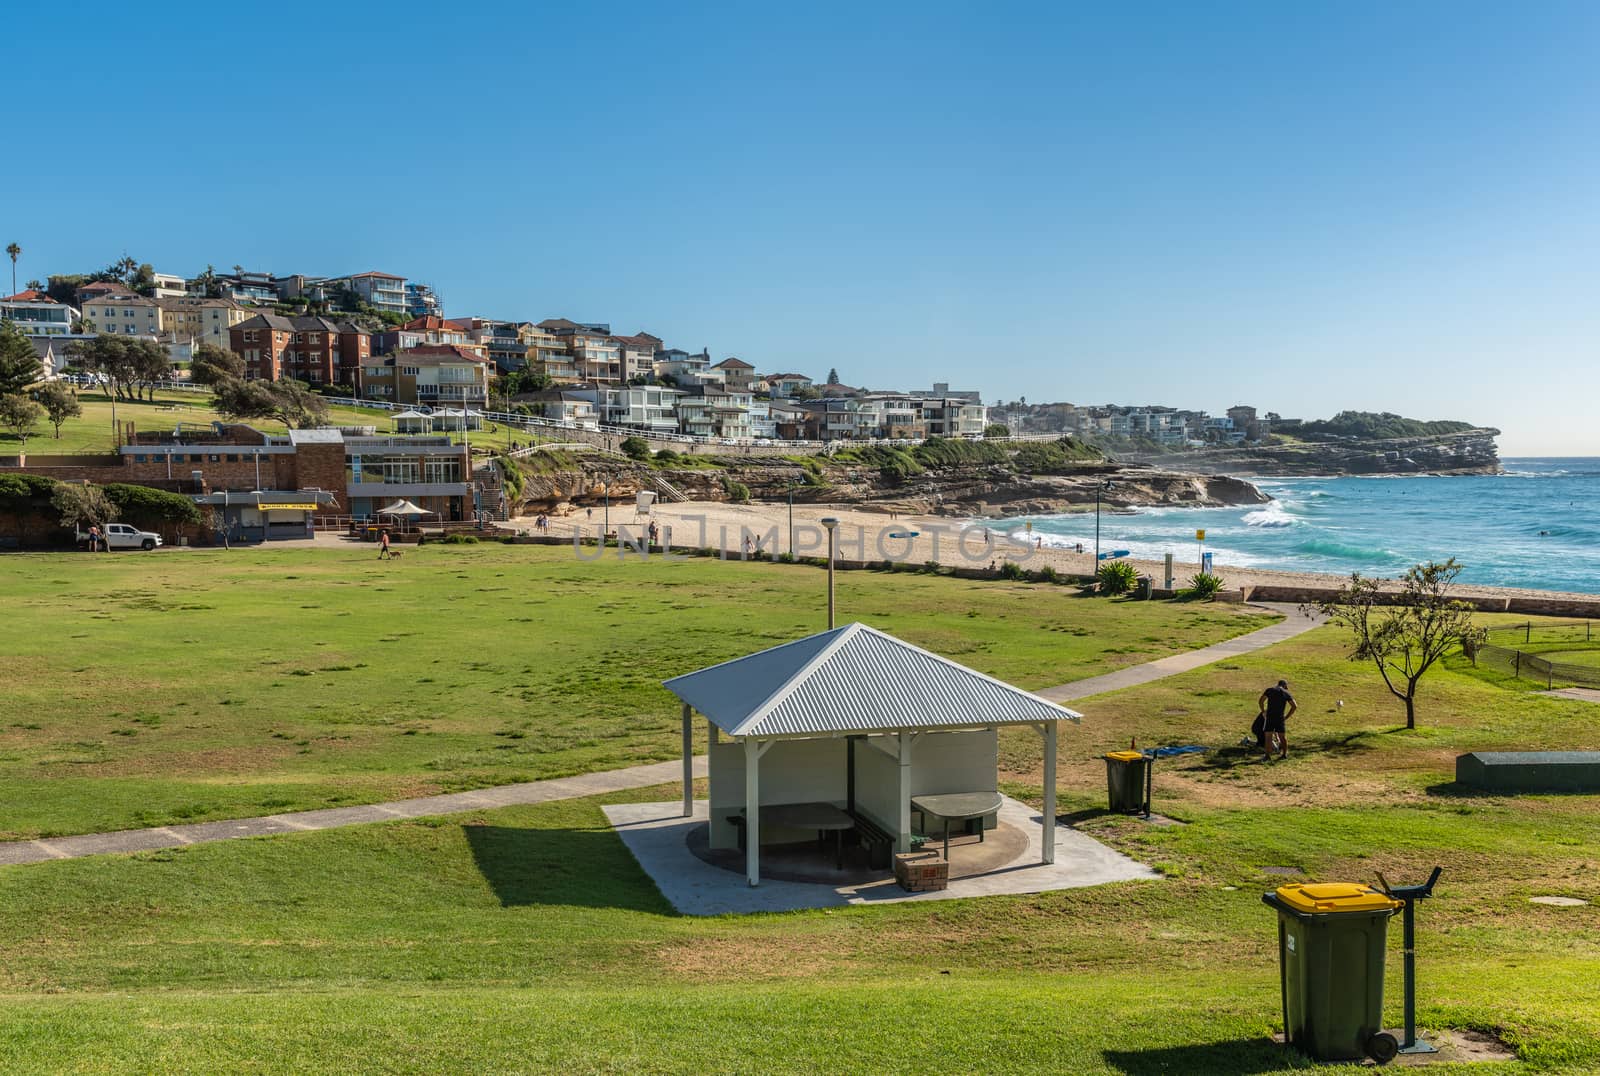 Bronte Park and Beach with view of North Shore, Sydney Australia by Claudine